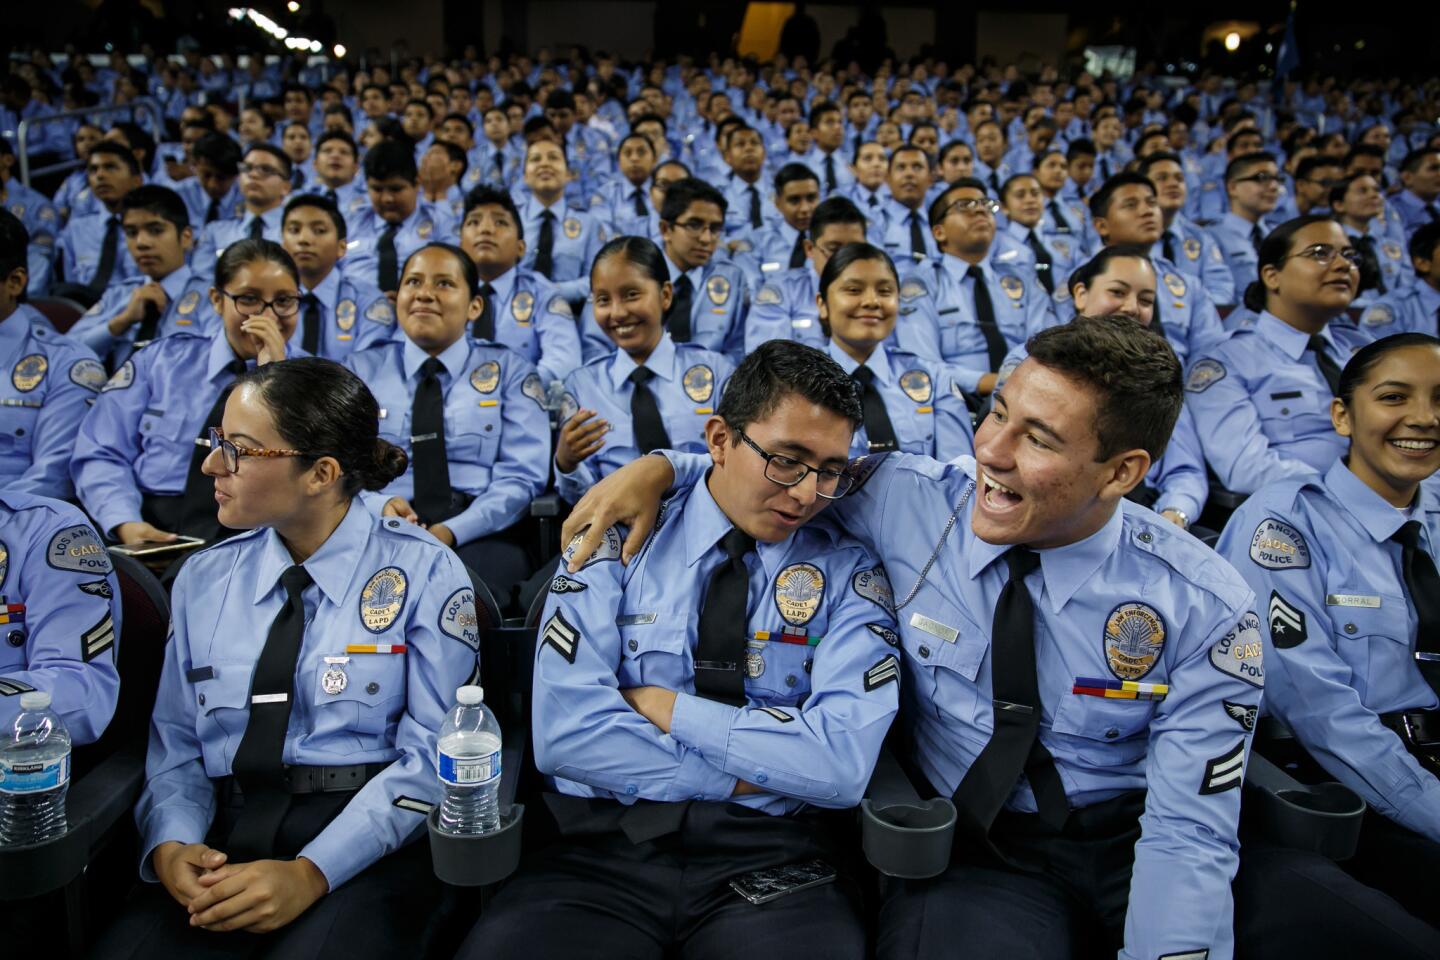 New LAPD cadets enjoy themselves at a graduation ceremony at USC's Galen Center on Saturday.